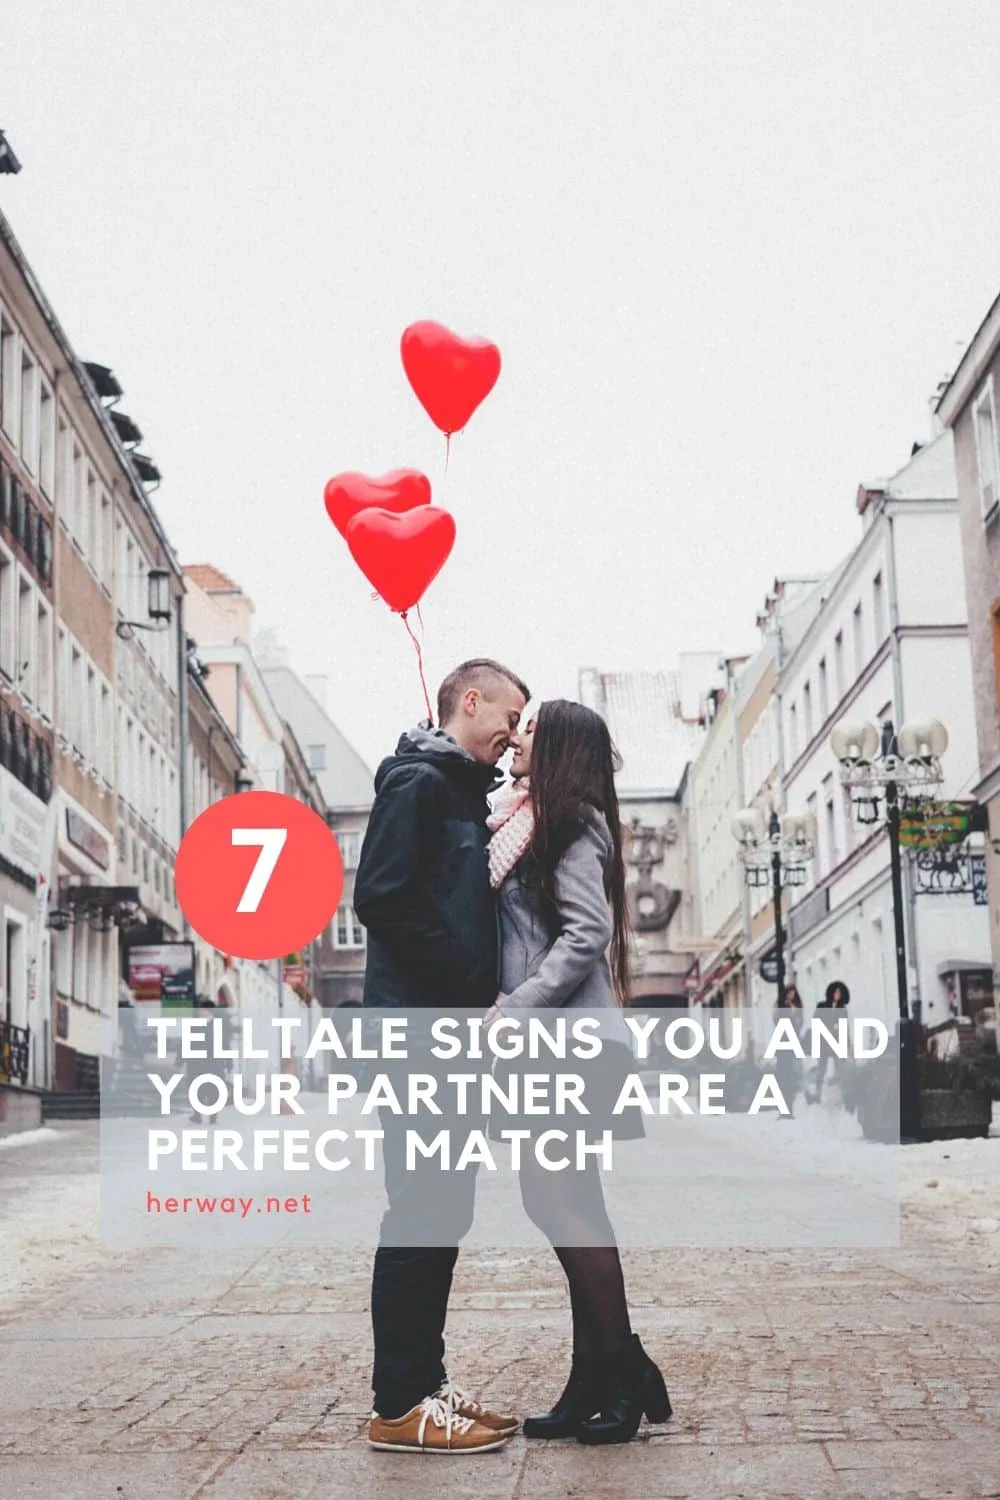 TELLTALE SIGNS YOU AND YOUR PARTNER ARE A PERFECT MATCH